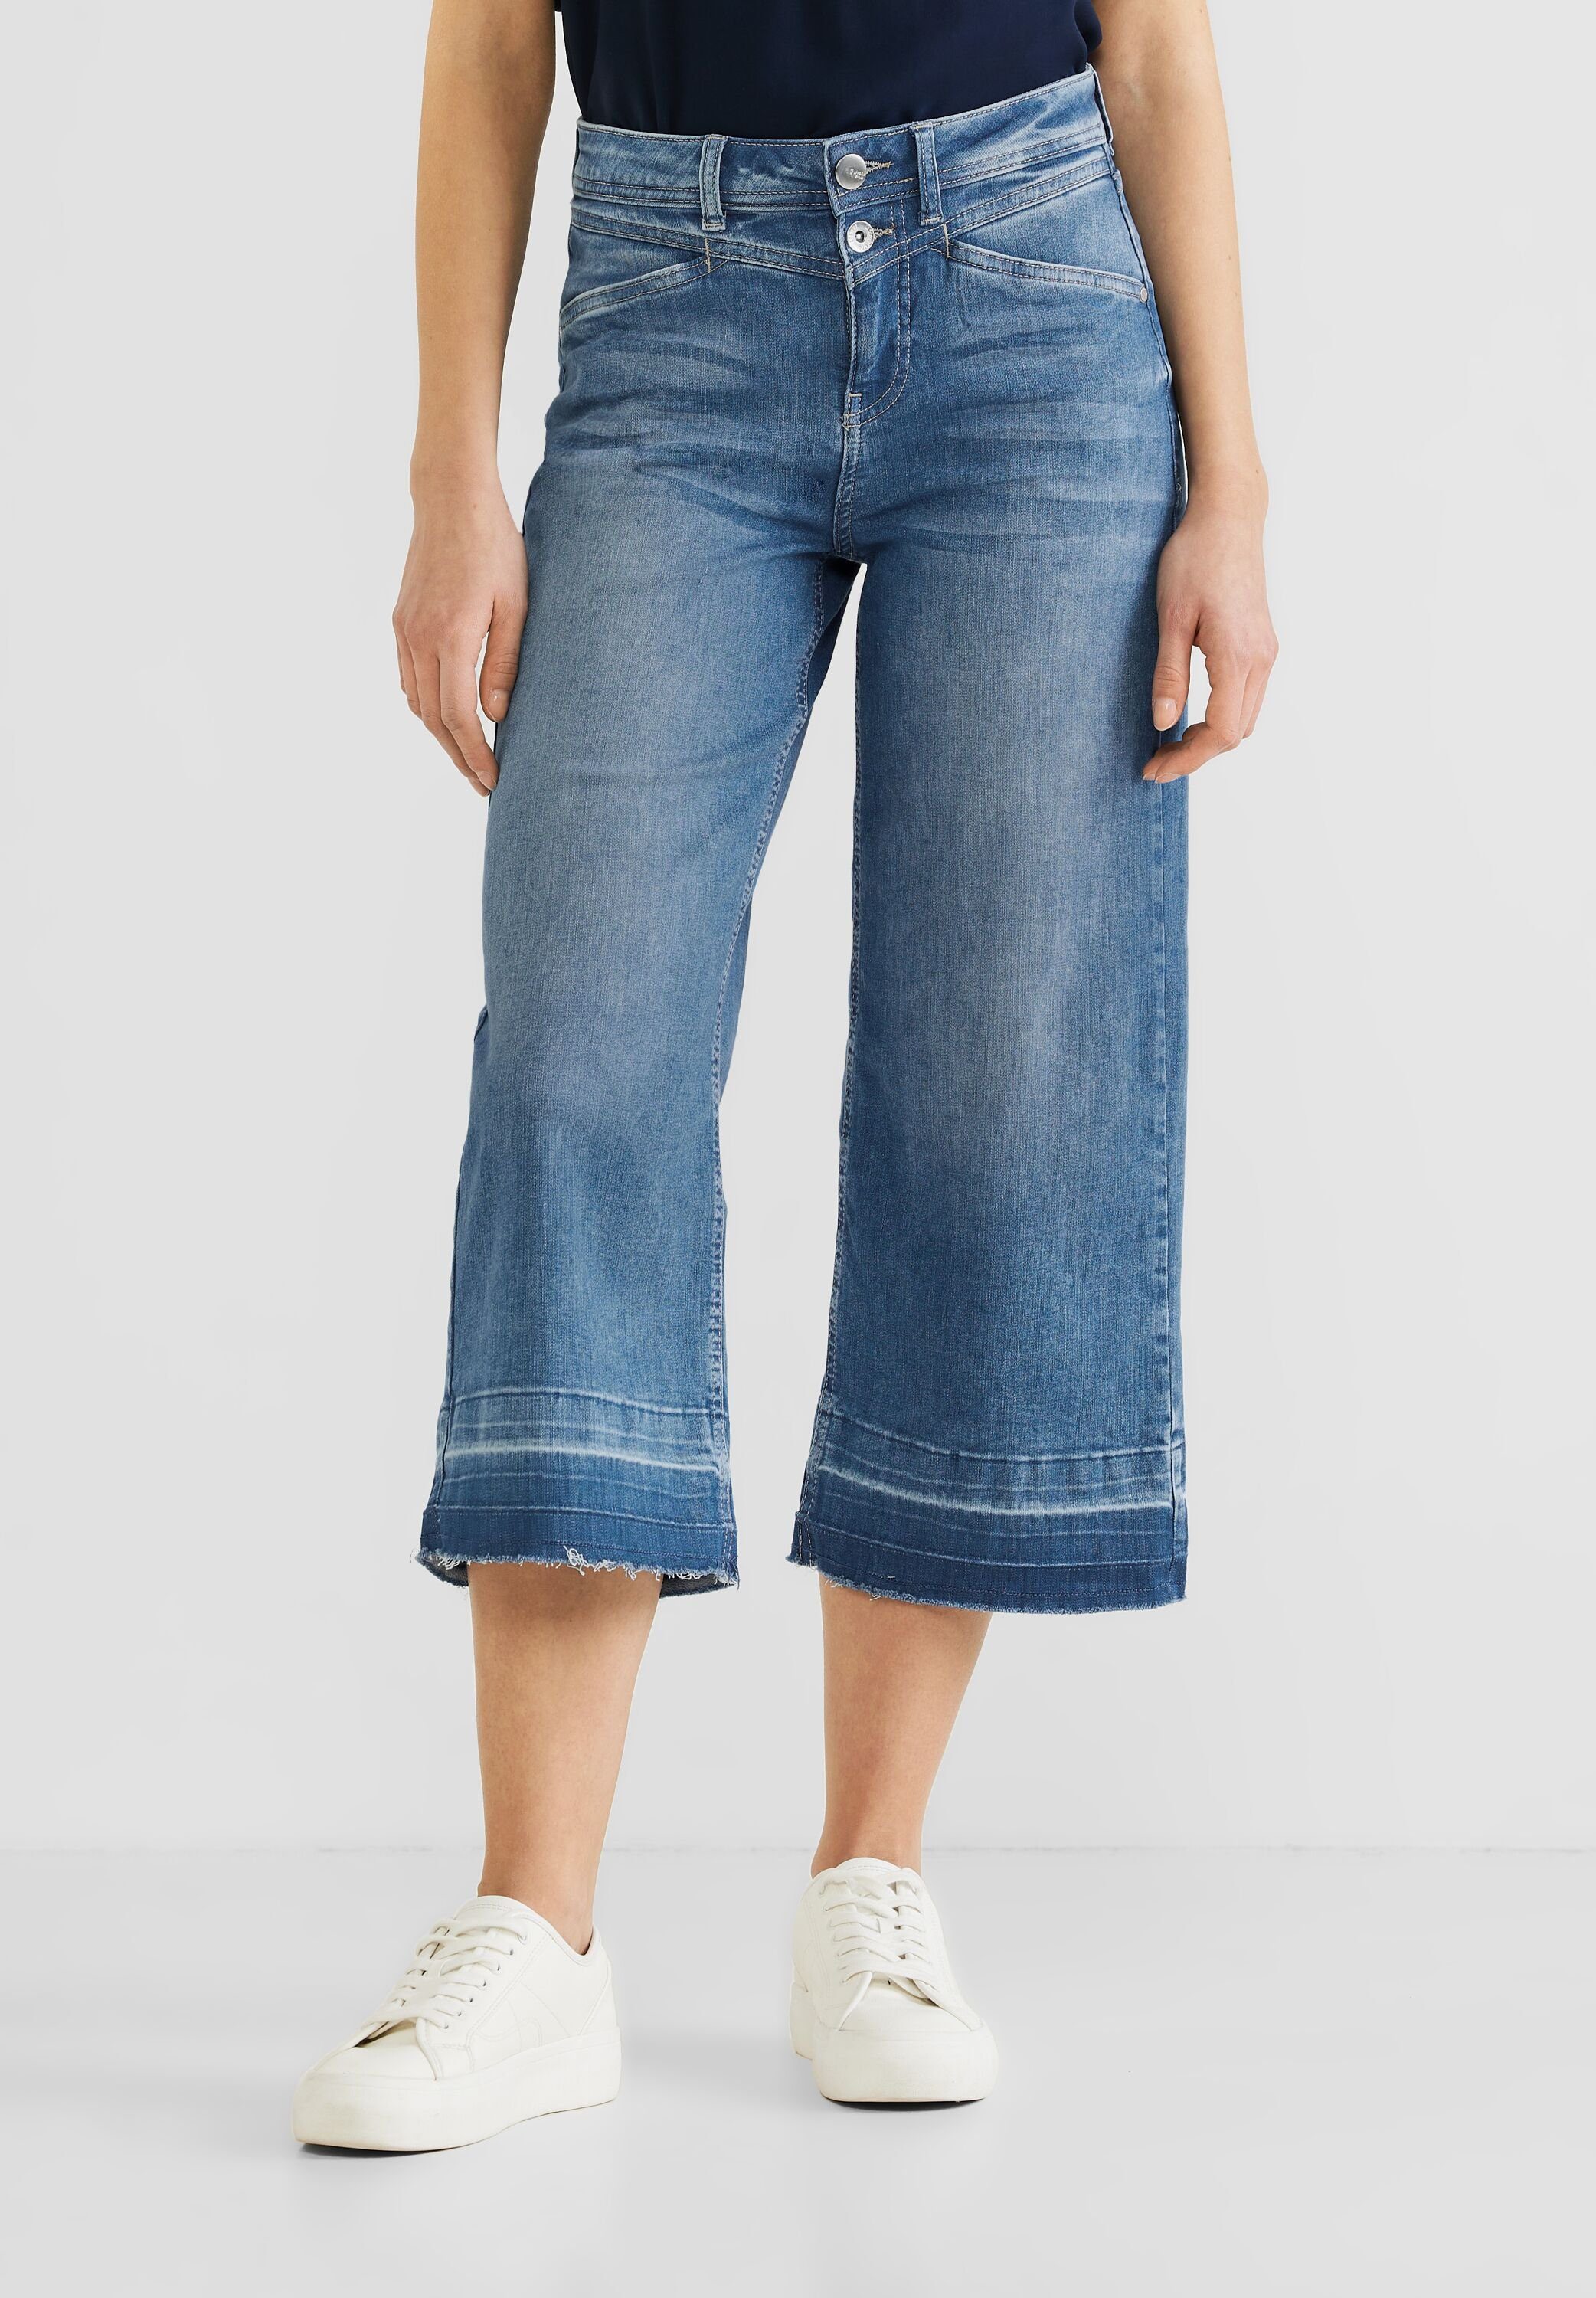 STREET ONE Bequeme Wa Blue Street (1-tlg) One Culotte Vorhanden in Casual Nicht Jeans Fit Jeans Sky